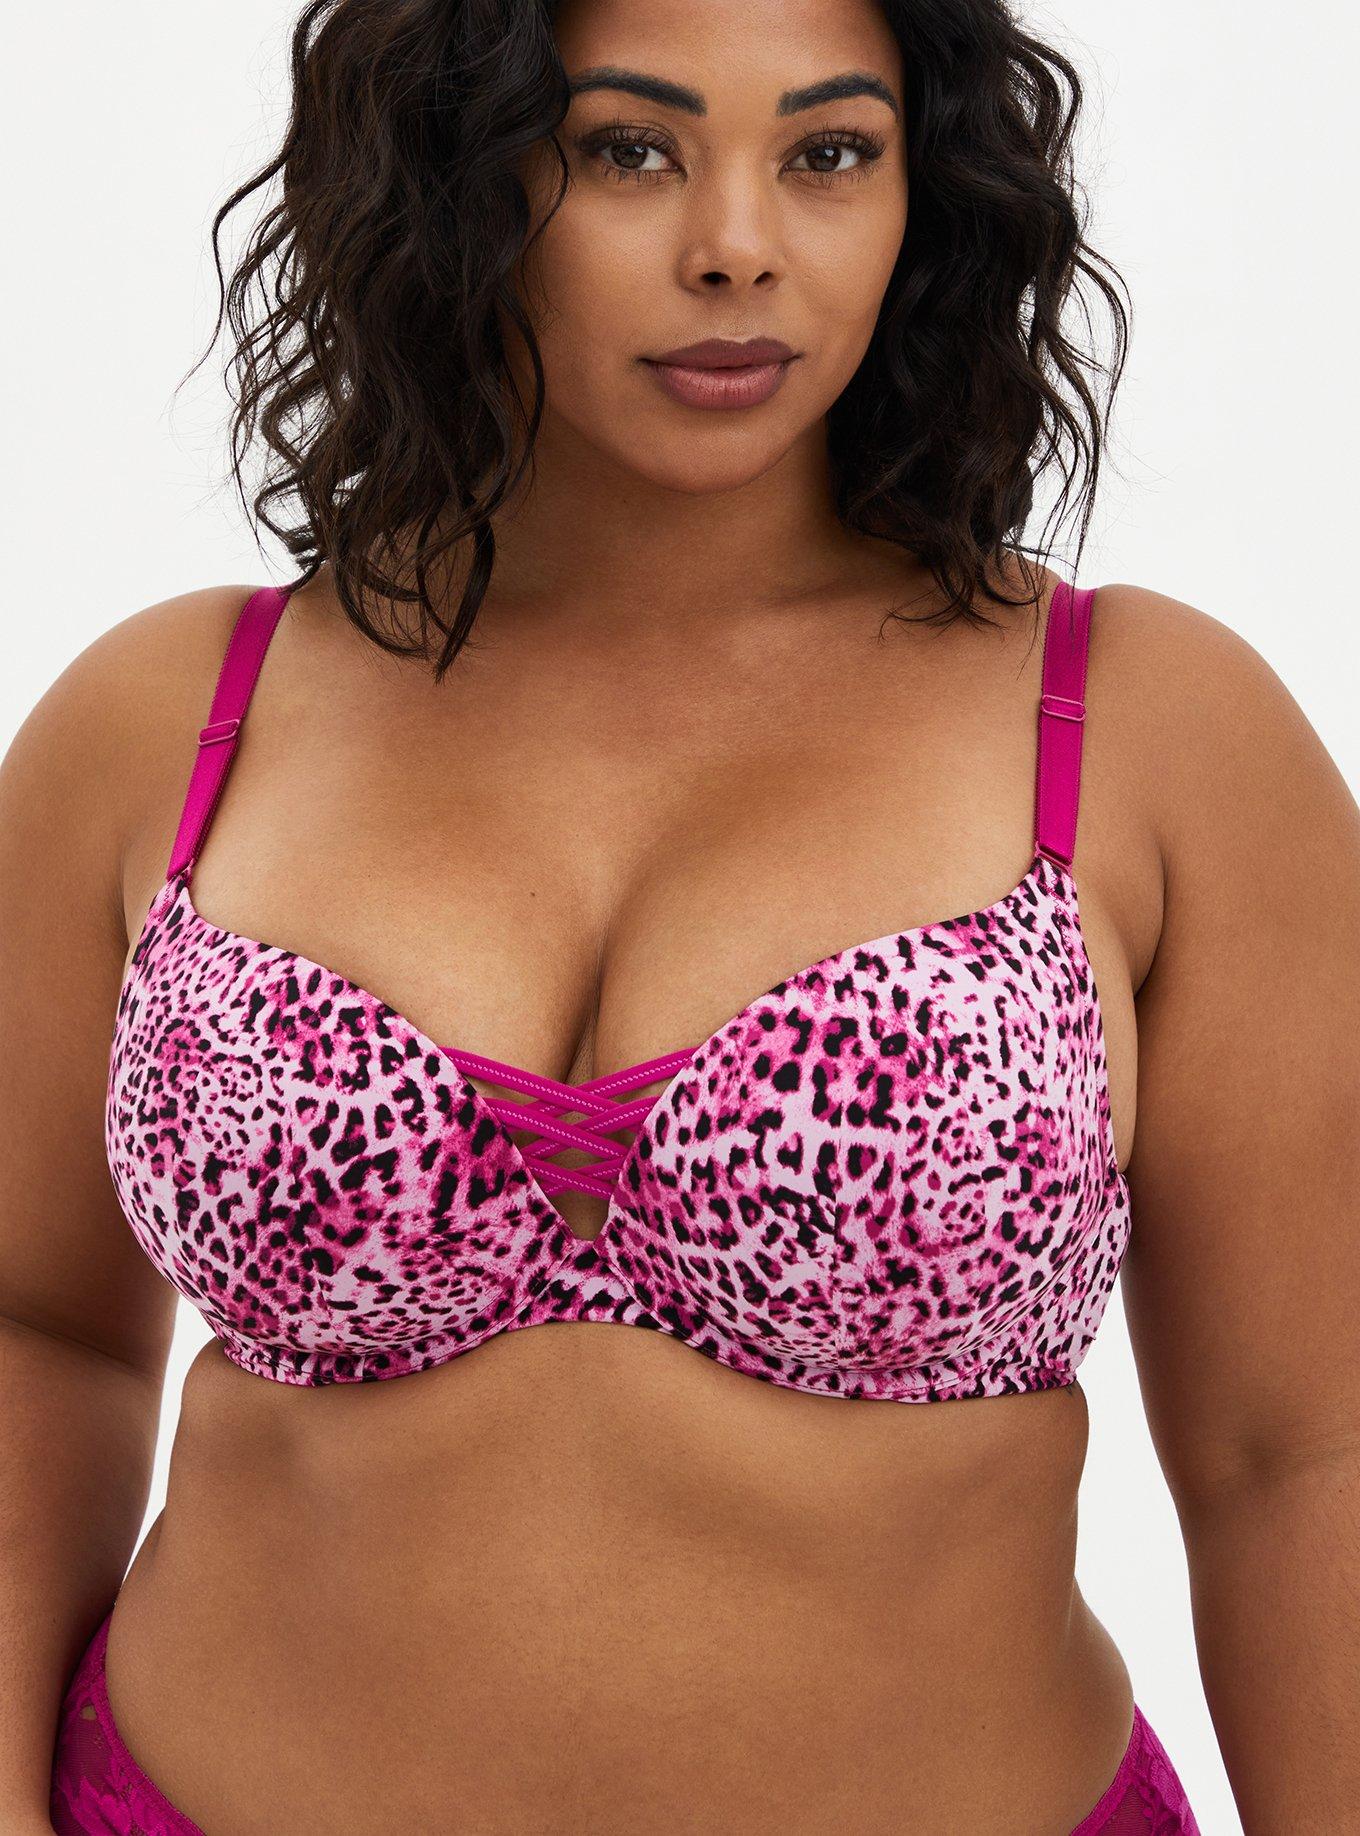 Size 48DDD Supportive Plus Size Bras For Women